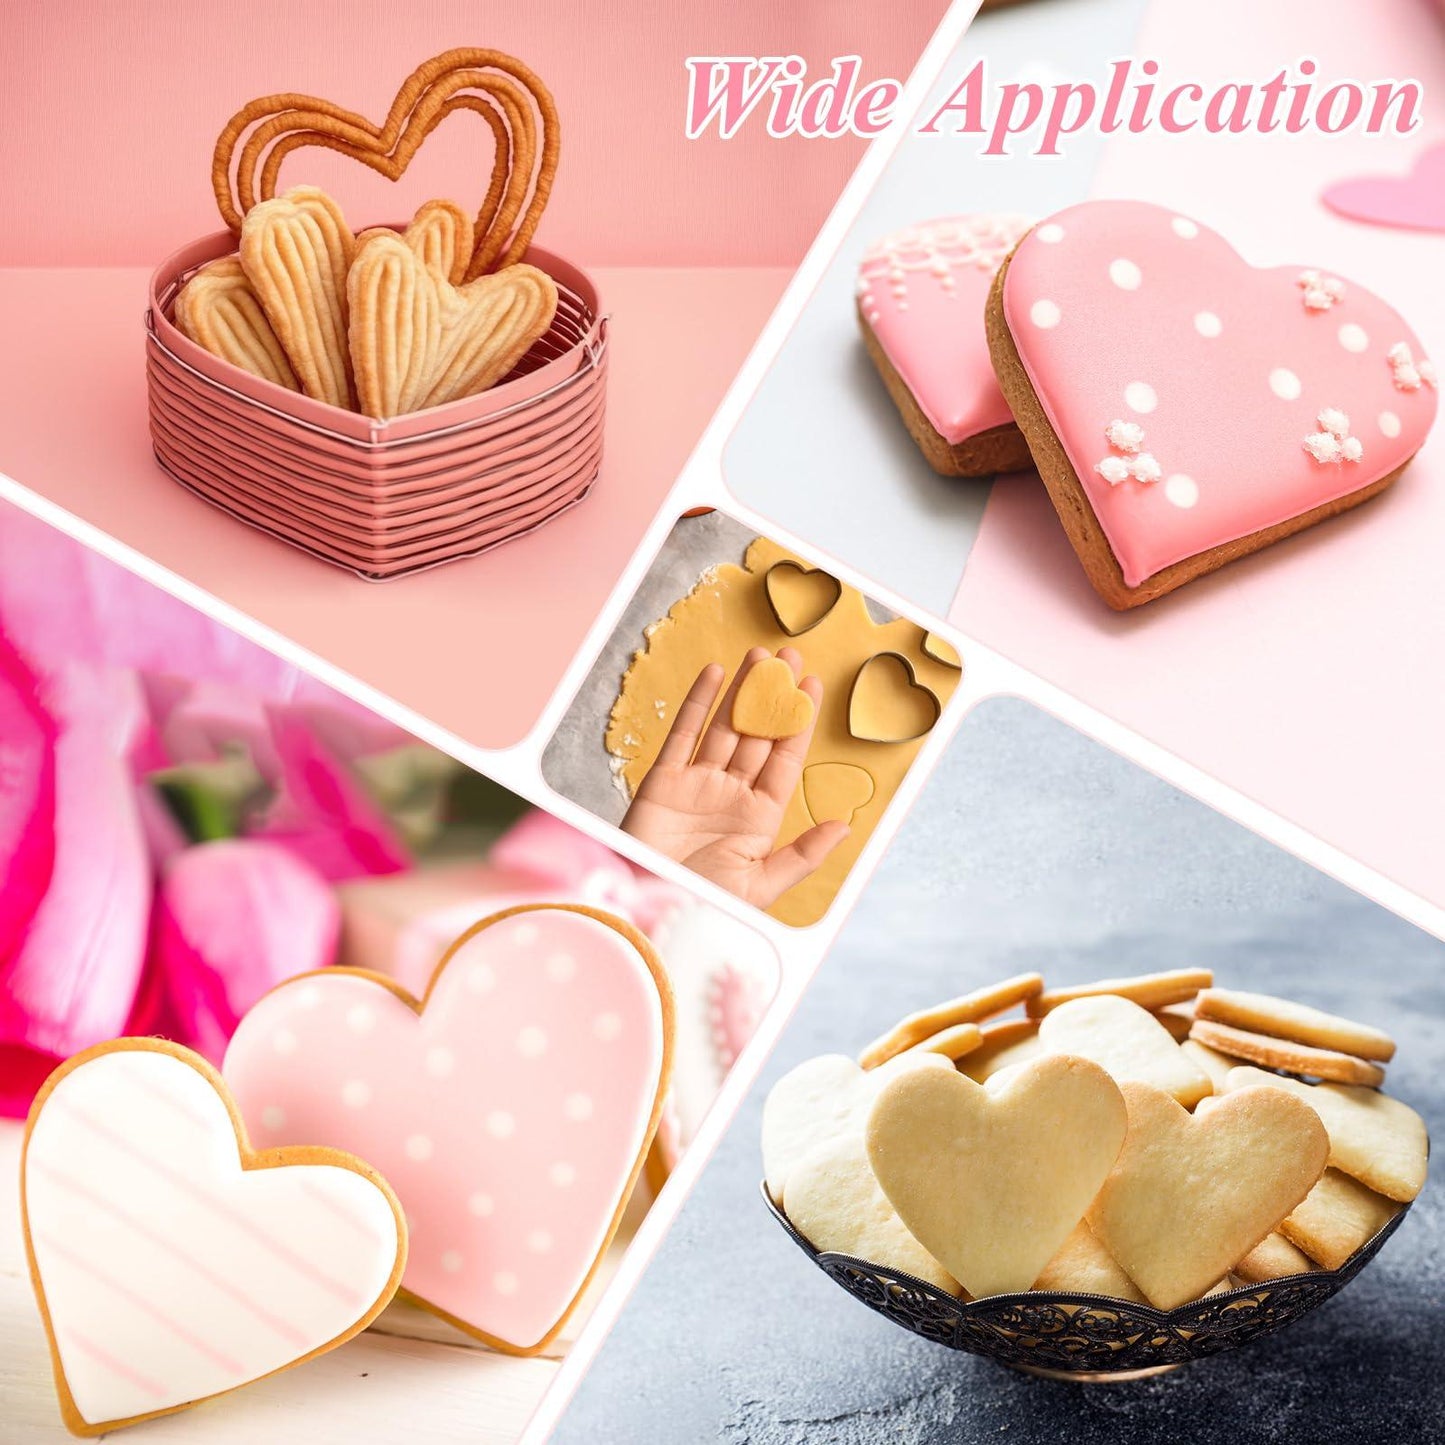 8 Pcs Heart Cookie Cutters Set Stainless Steel Cookie Cutters 1.7” 2.2” 2.8” 3.4” 4.1” 4.5” Heart Shape DIY Cookie Cutters Valentine's Day Present for Sandwiches, Cookie, Biscuit (Heart) - CookCave